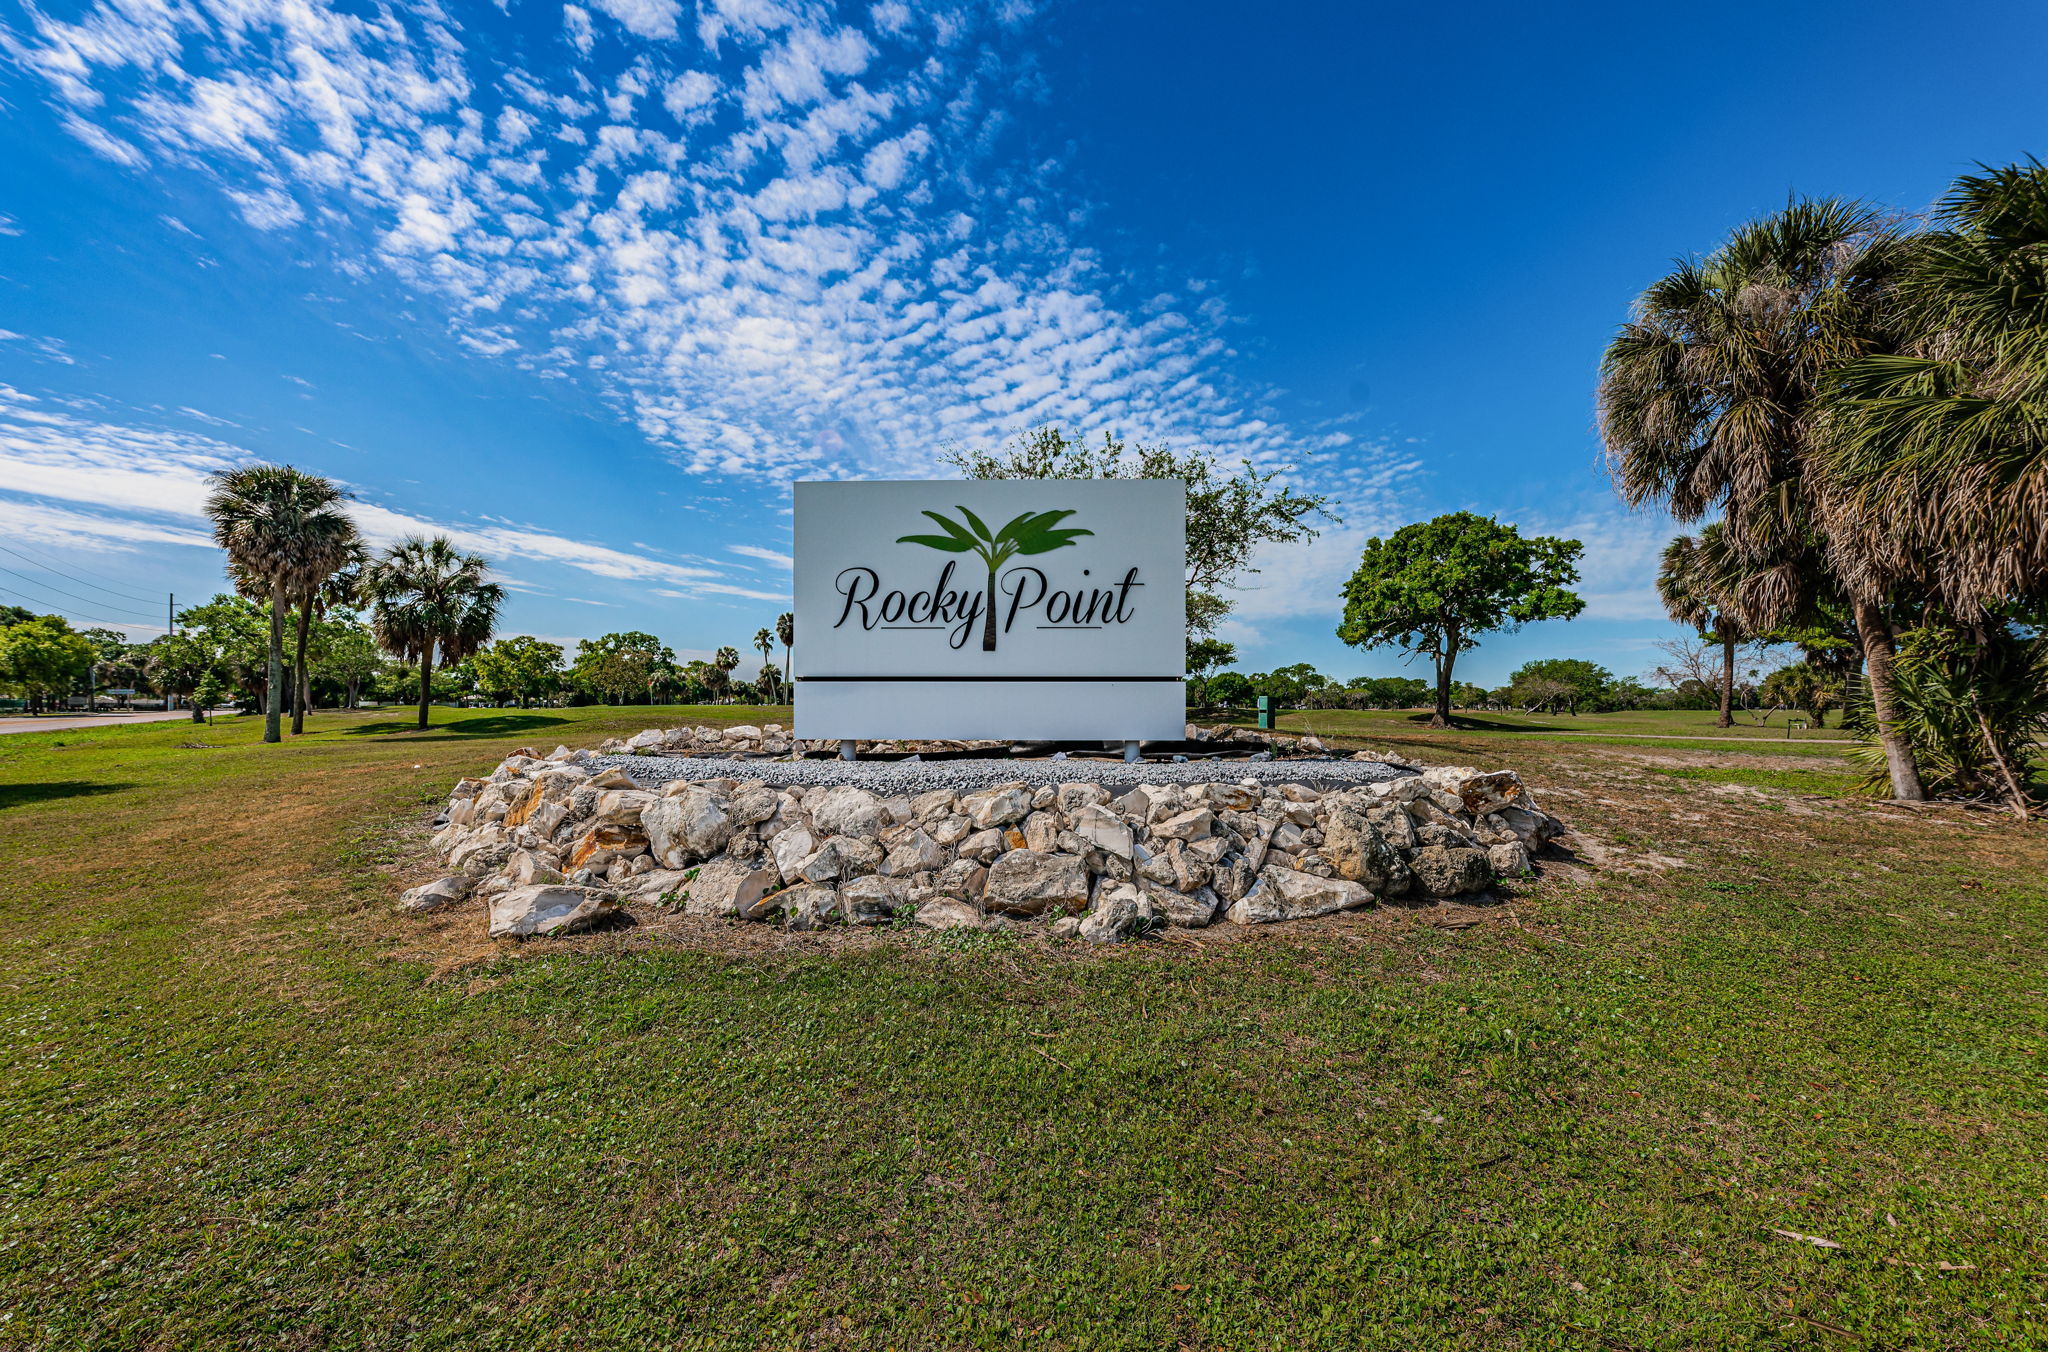 10-Rocky Point Golf Course Sign